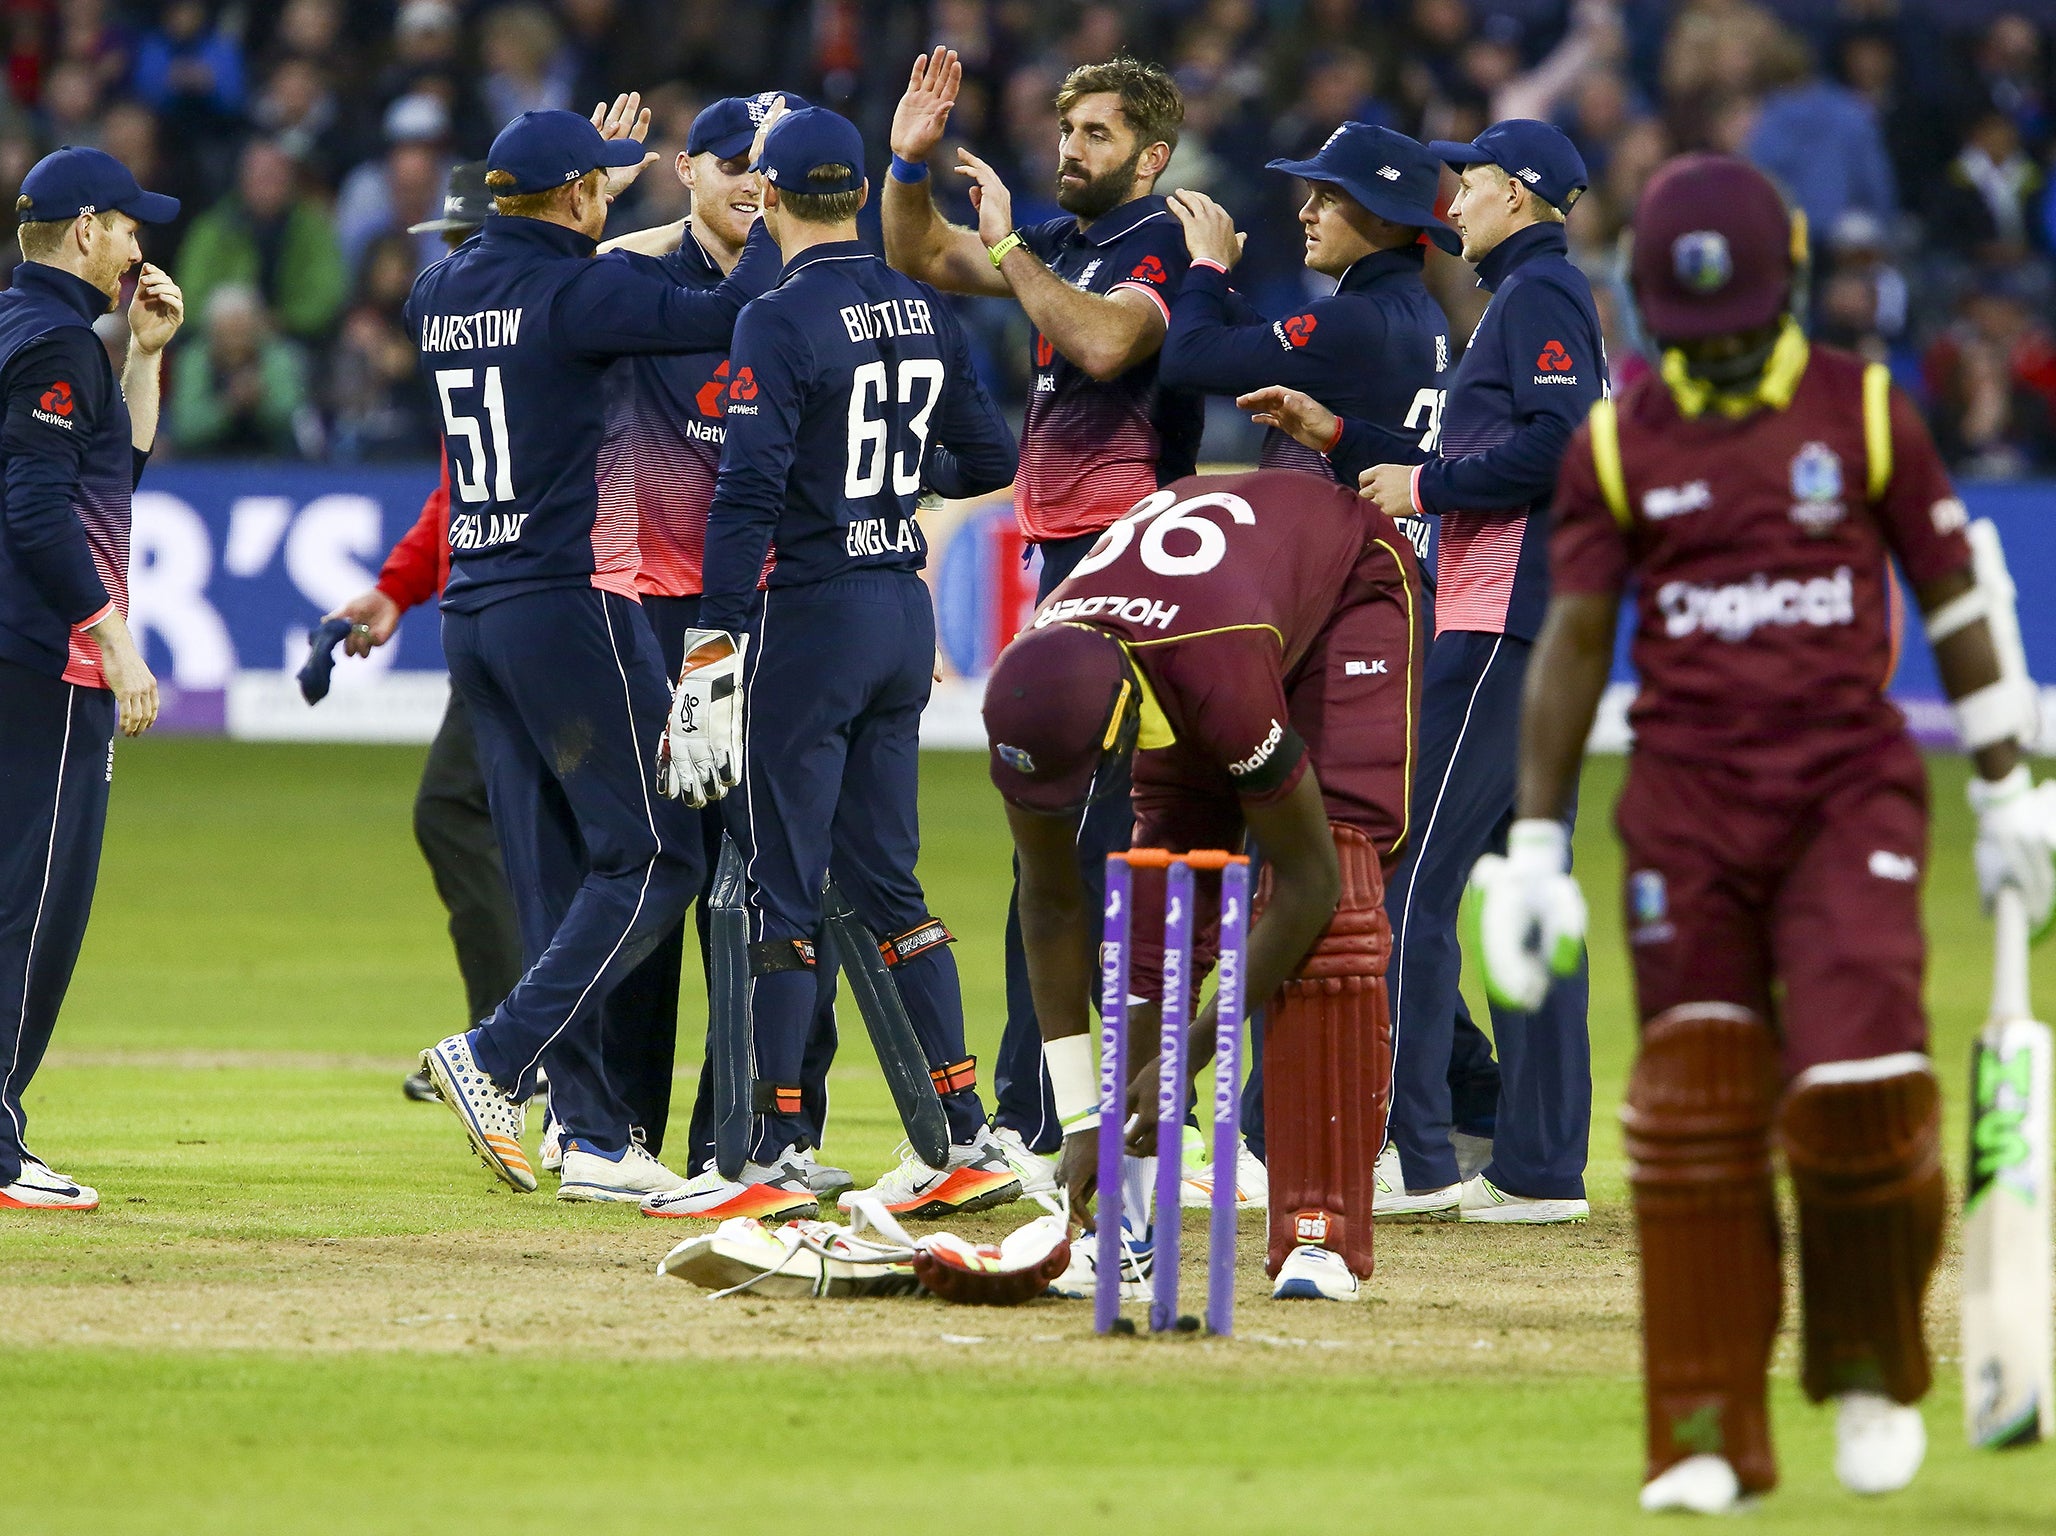 England recovered from a perilous position to beat the West Indies